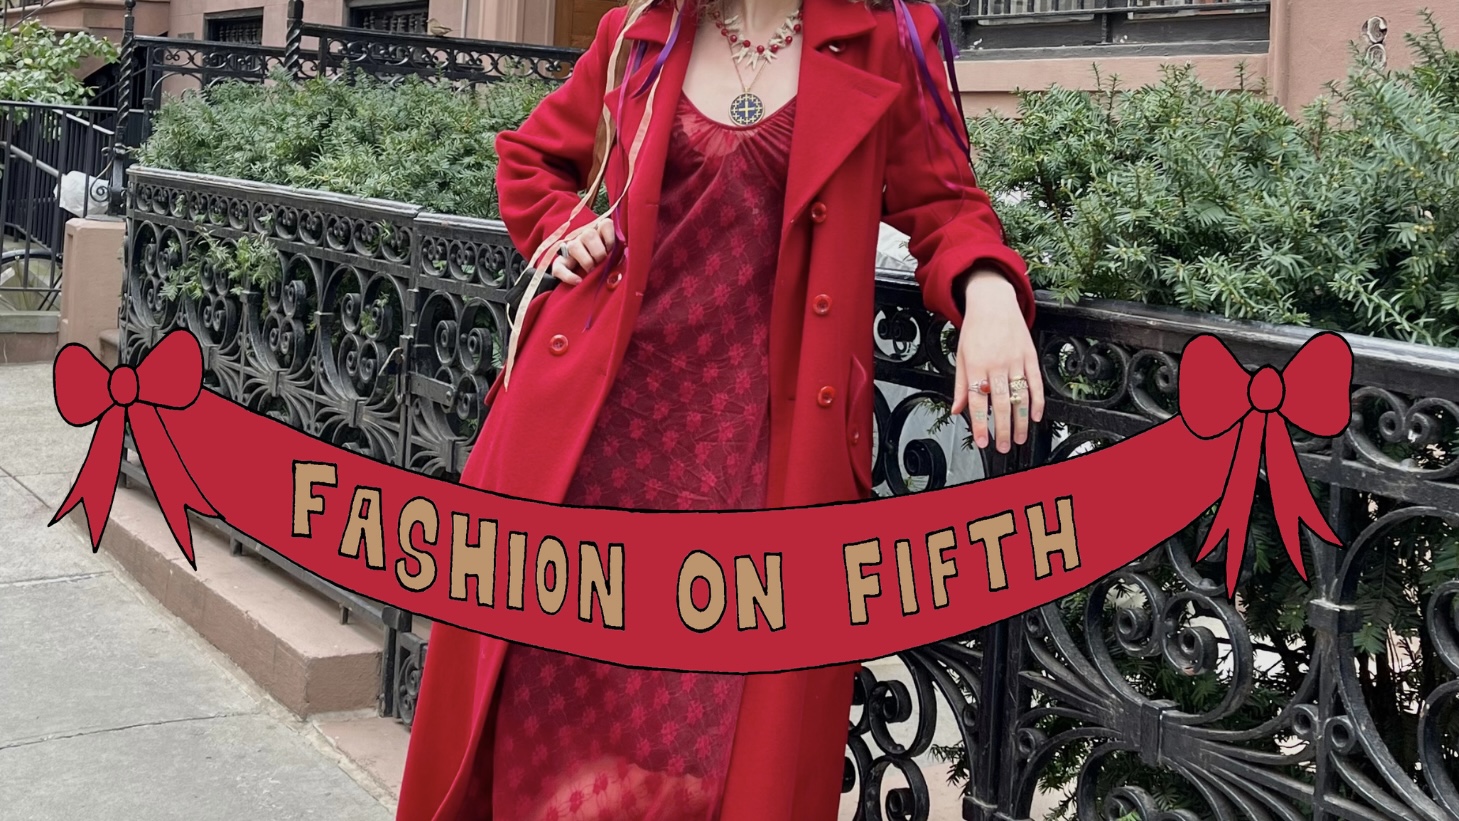 A girl in a red coat and red dress leaning against a black railing in front of green bushes. A red banner with bows on either end reads “Fashion on Fifth” in bold beige letters.